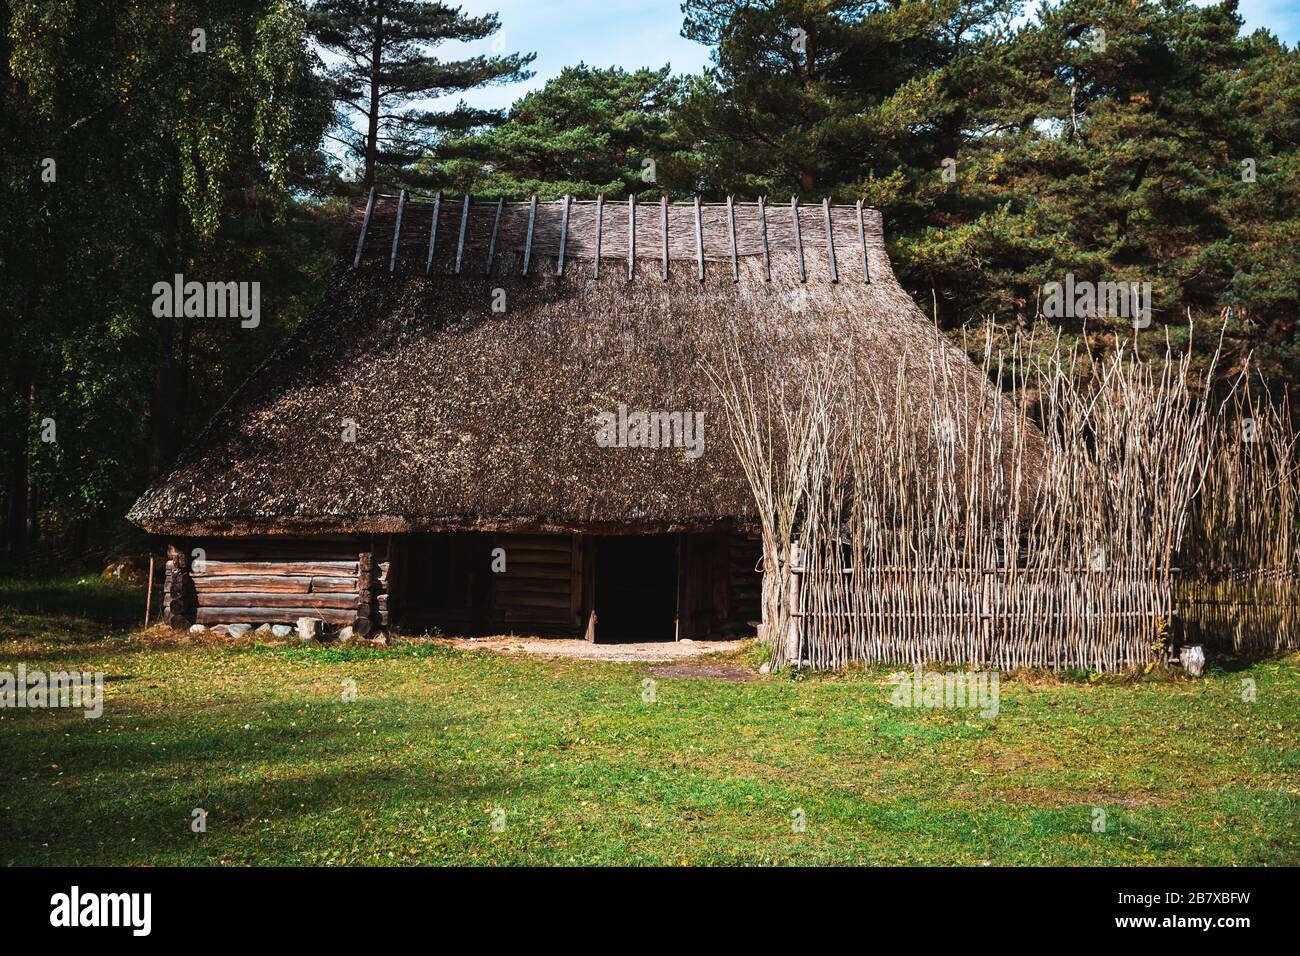 Estonian traditional vernacular architecture with straw thatched roof and log walls Stock Photo